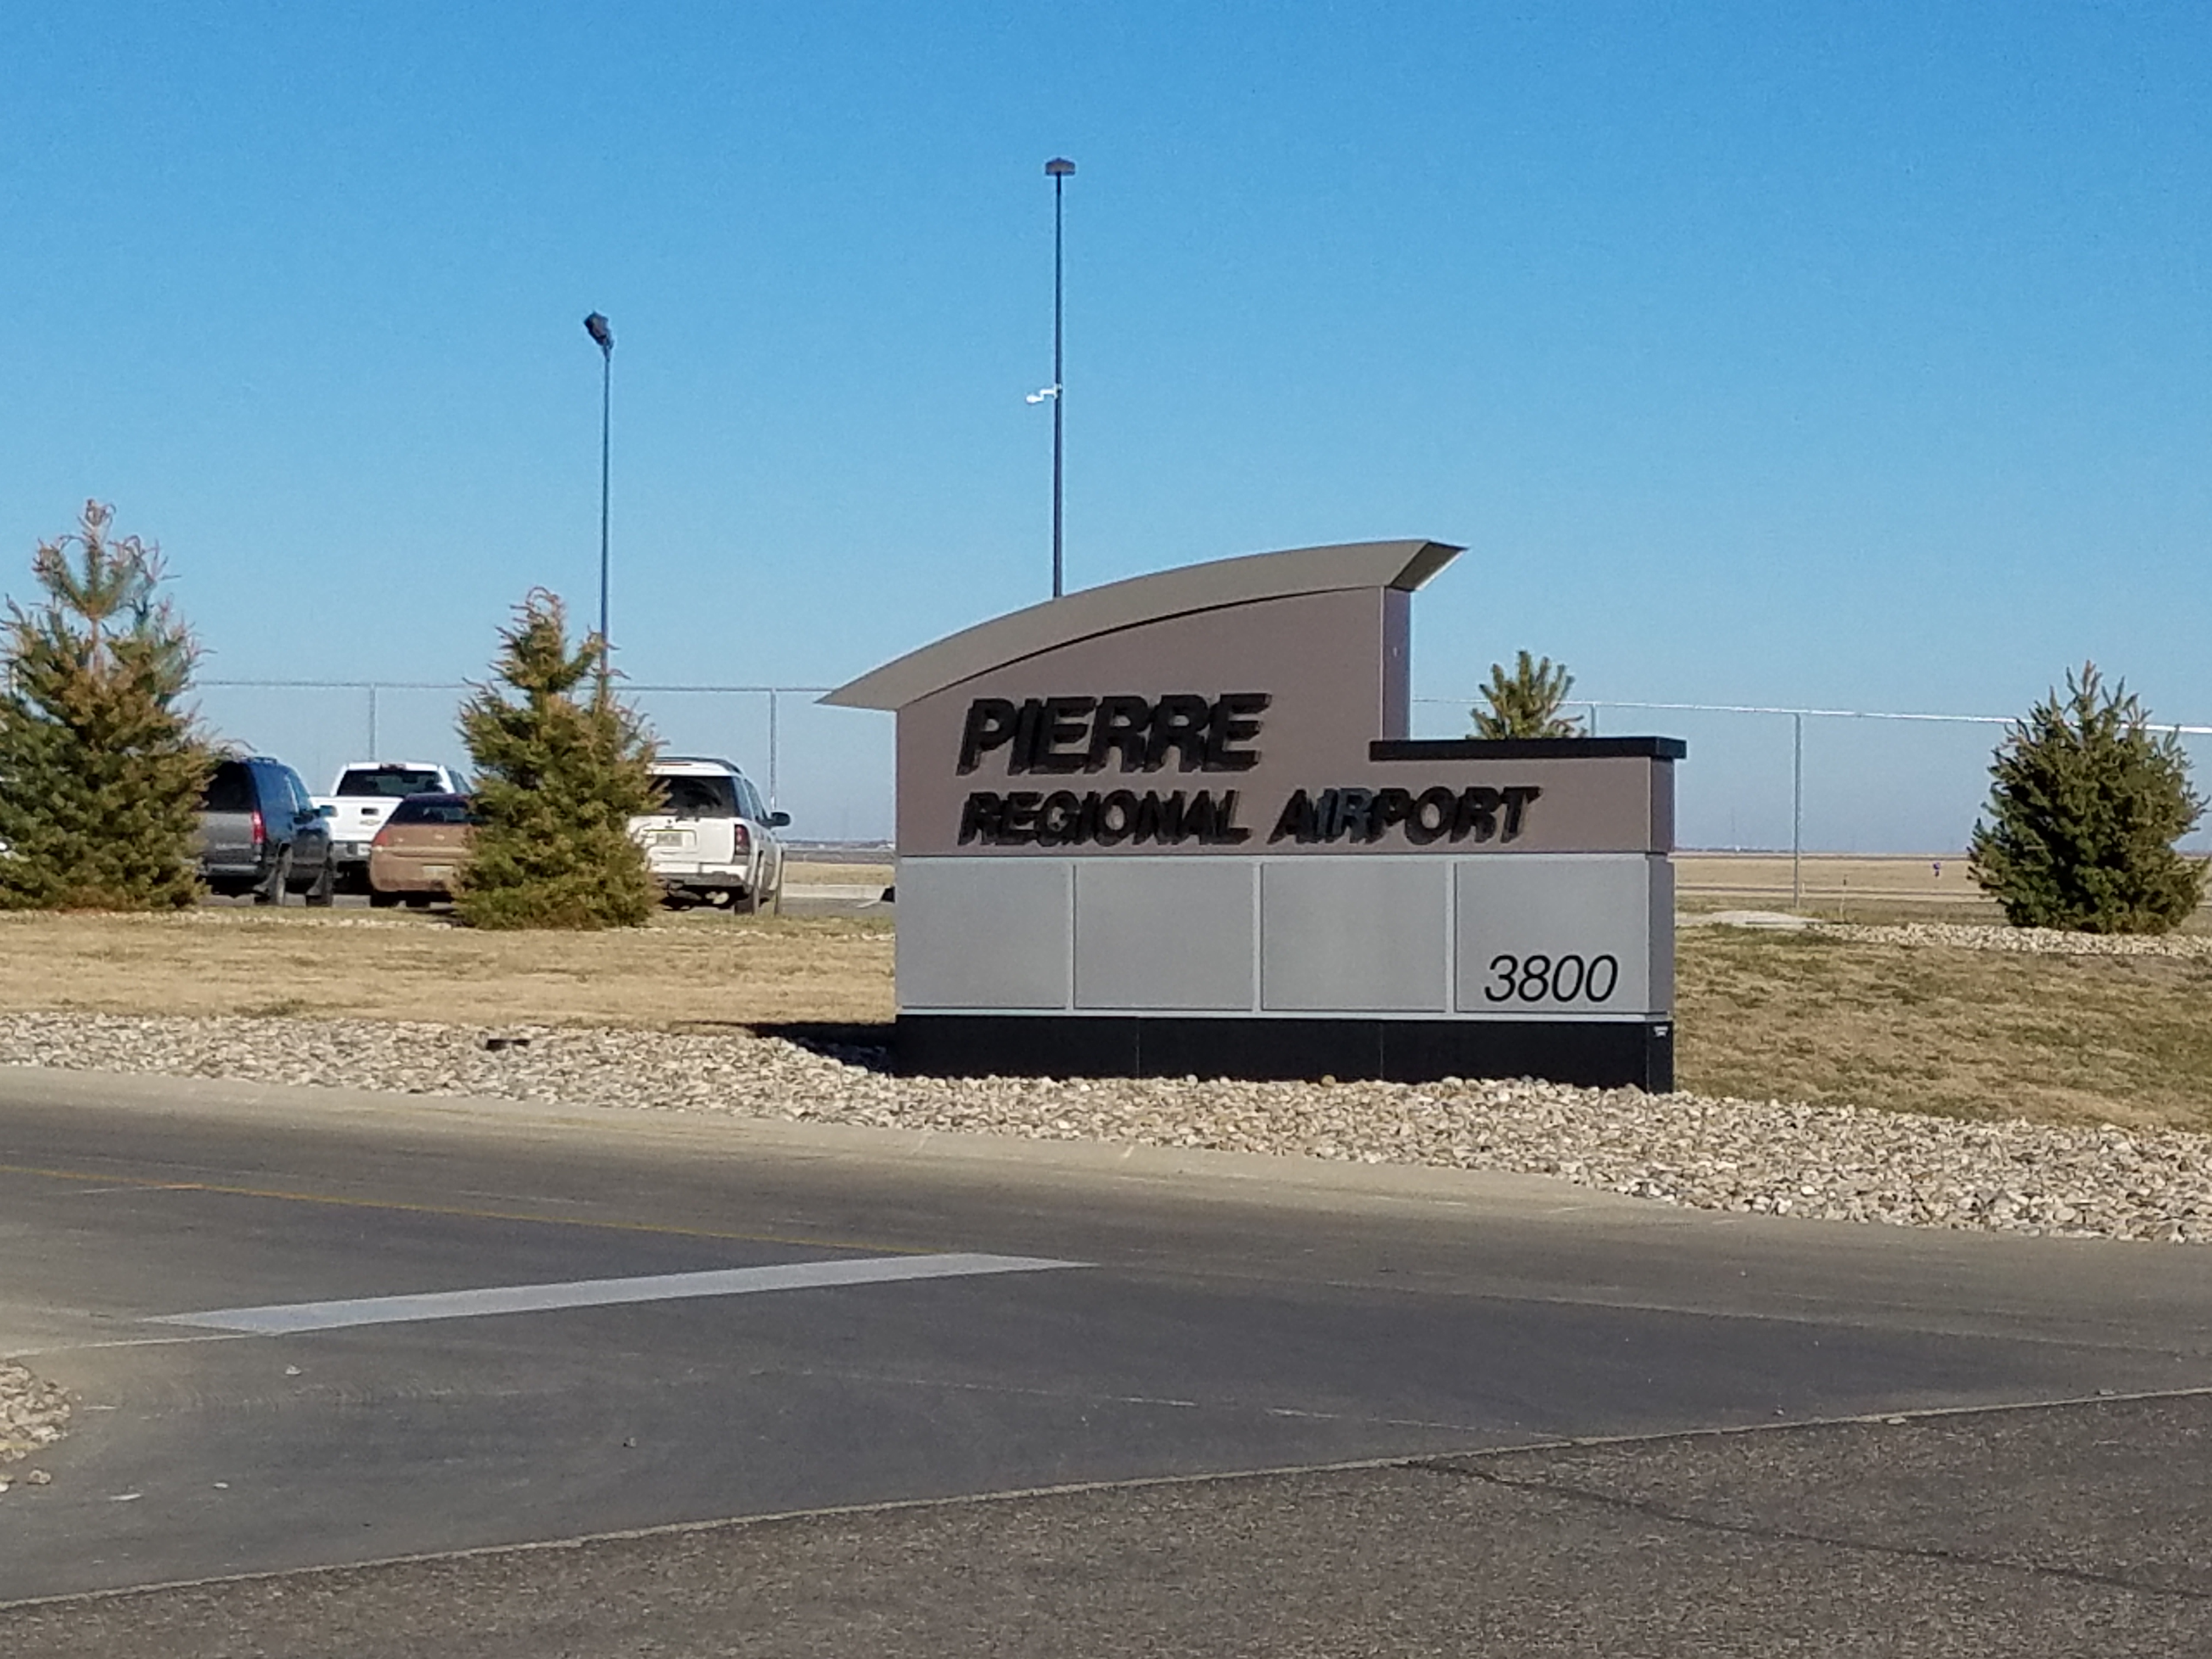 Pierre City Commission Approves New Equipment For Airport